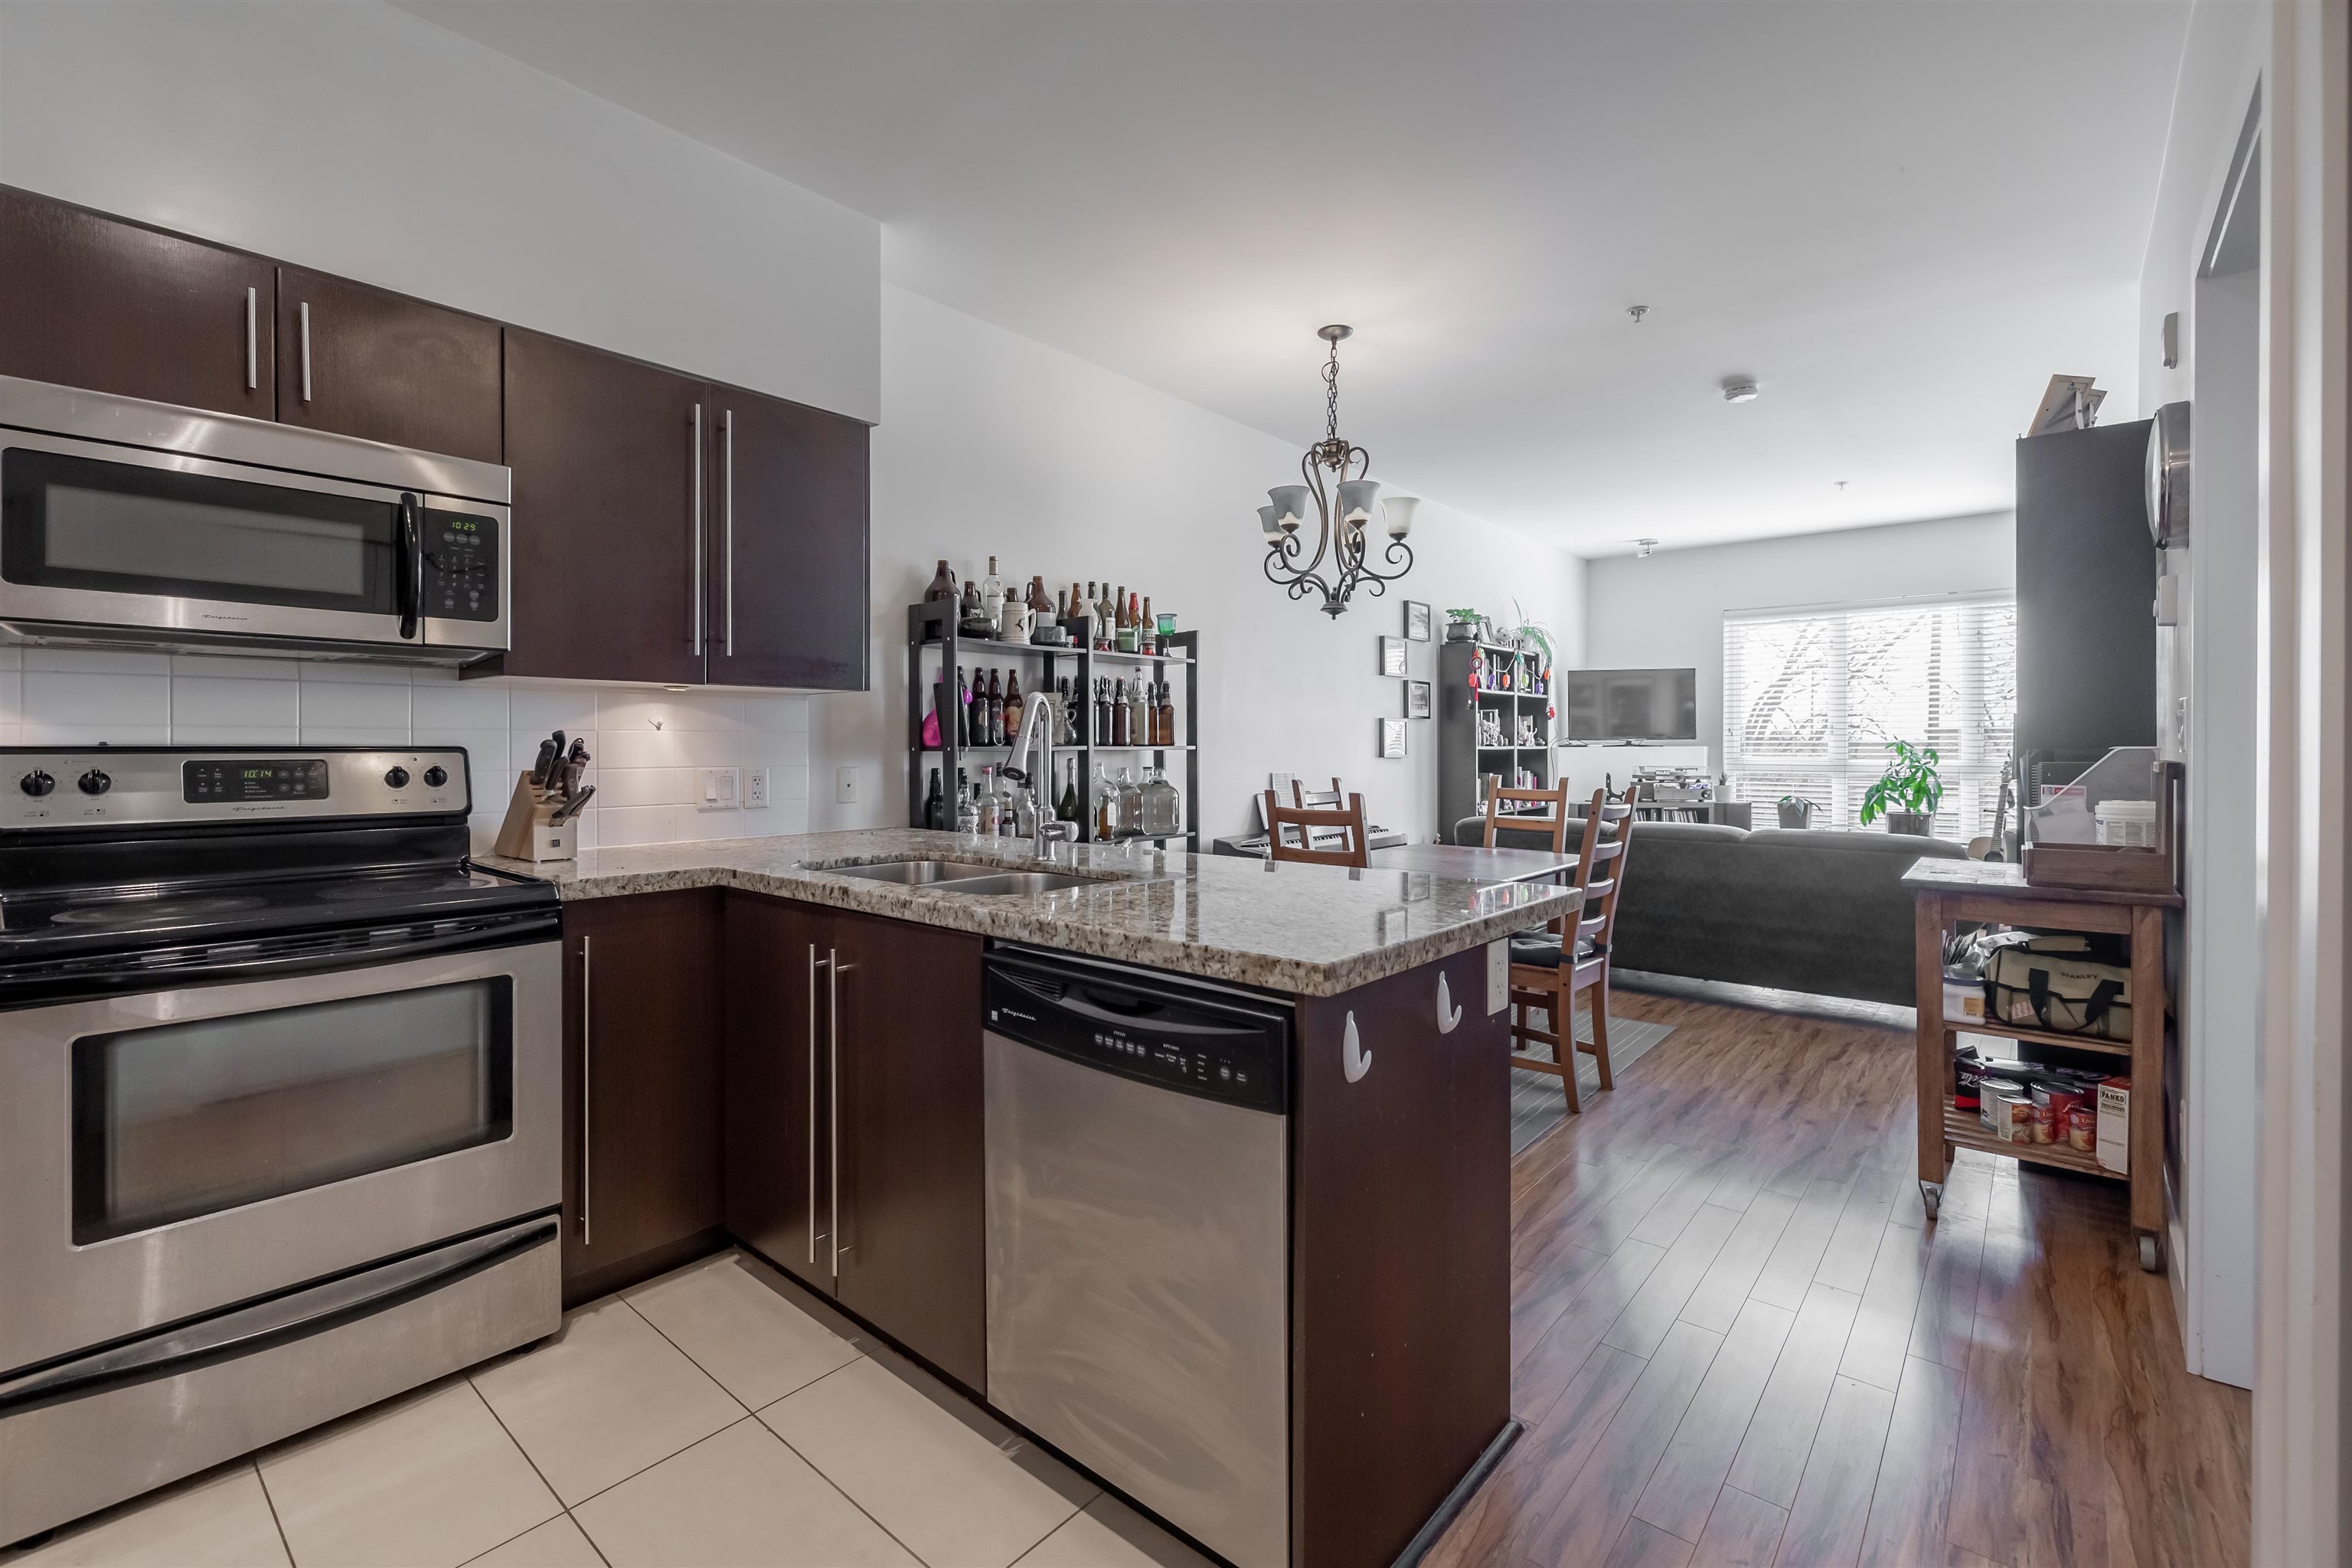 Highgate Apartment/Condo for sale:  1 bedroom 763 sq.ft. (Listed 9600-05-04)